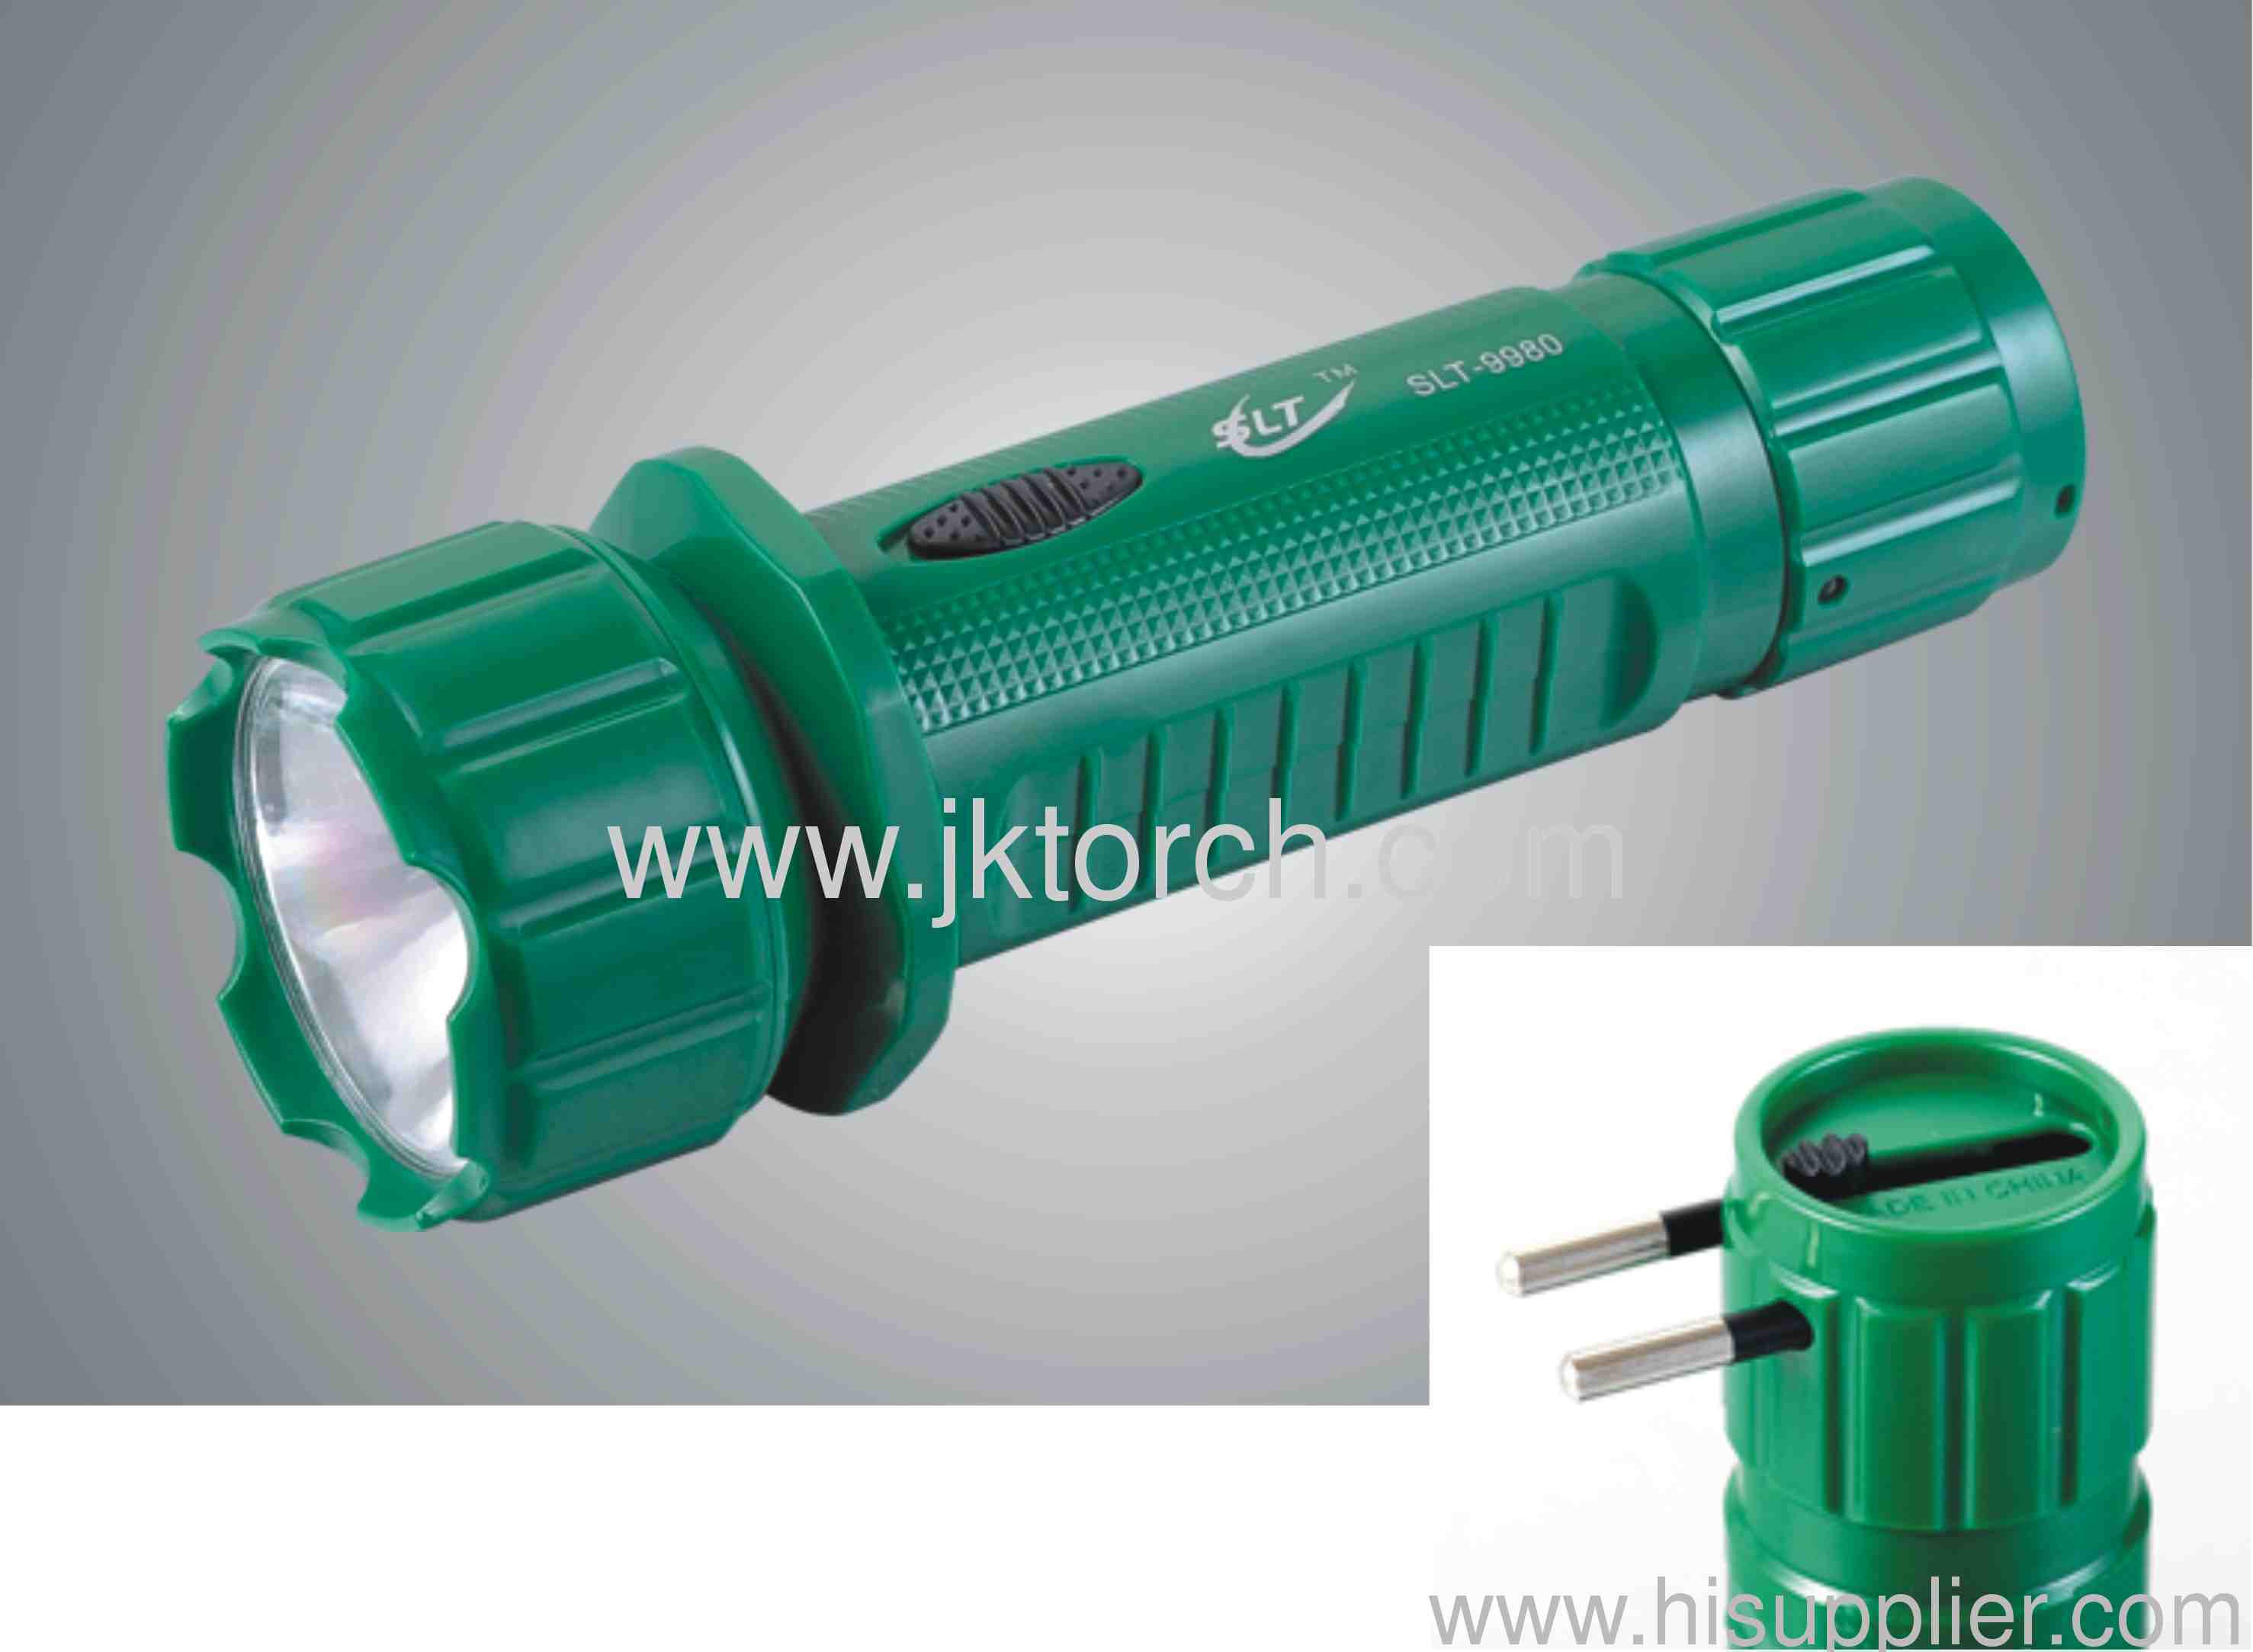 Small size rechargeable LED plastic flashlight